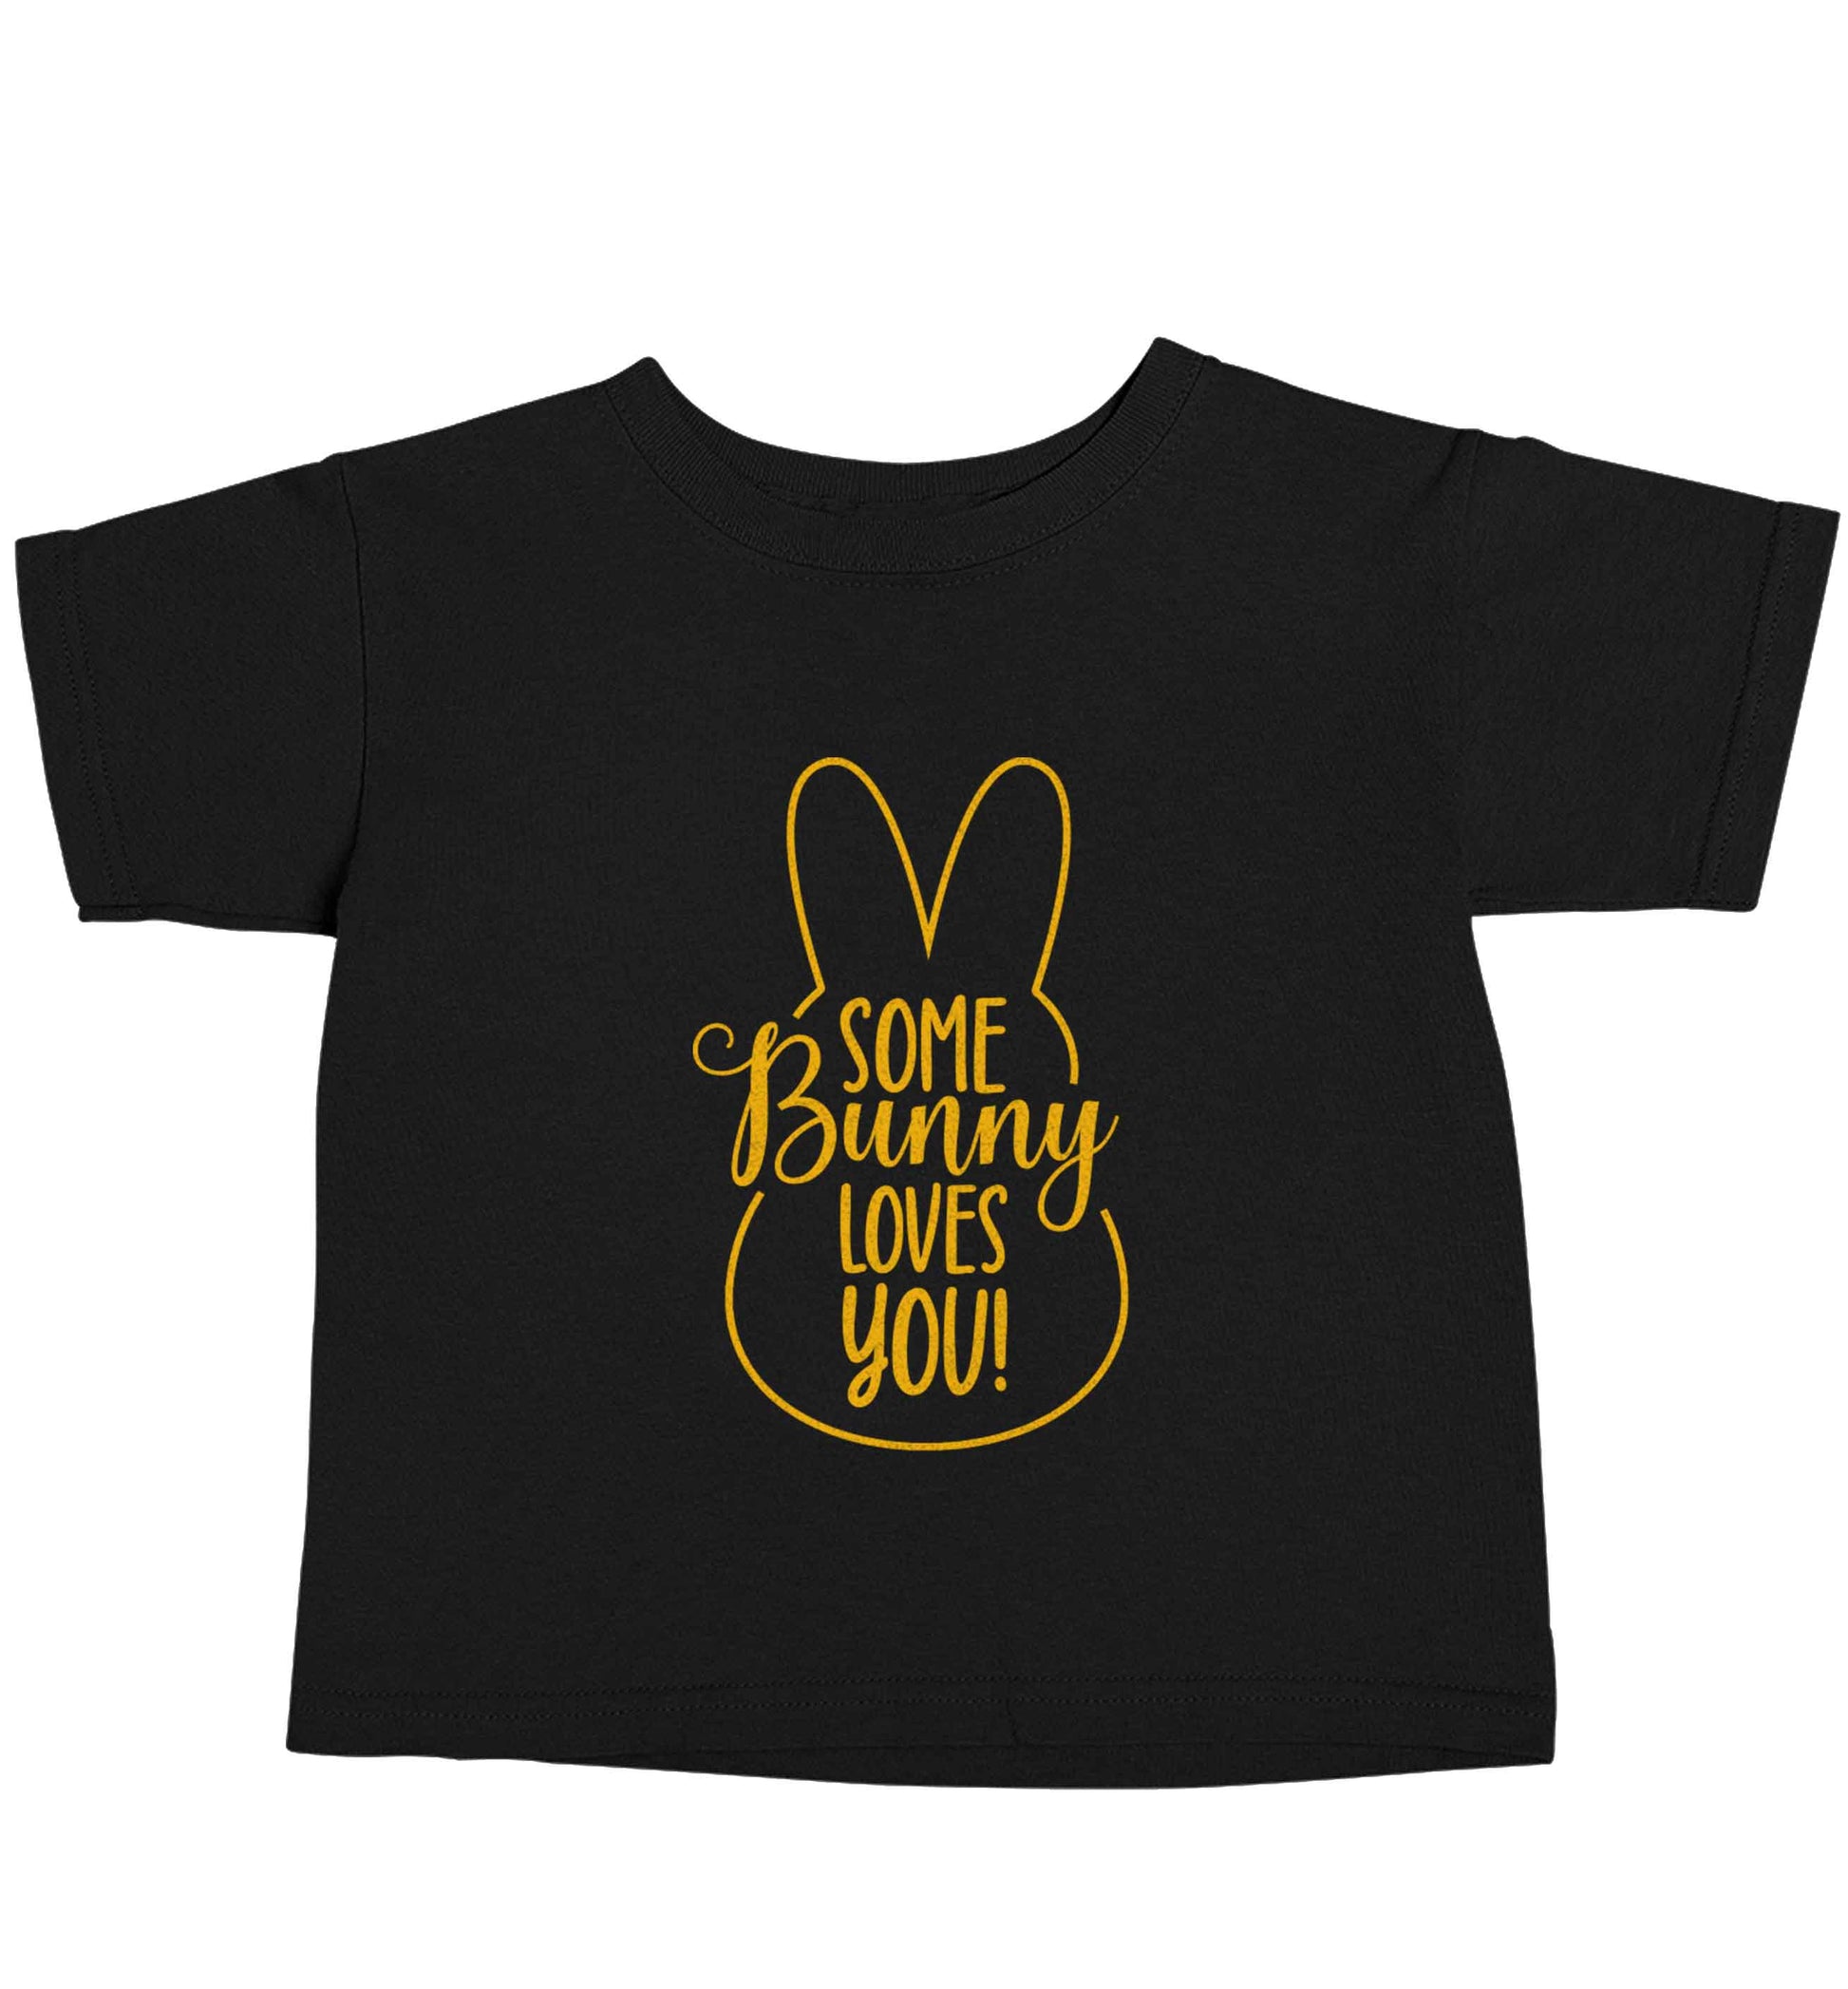 Some bunny loves you Black baby toddler Tshirt 2 years